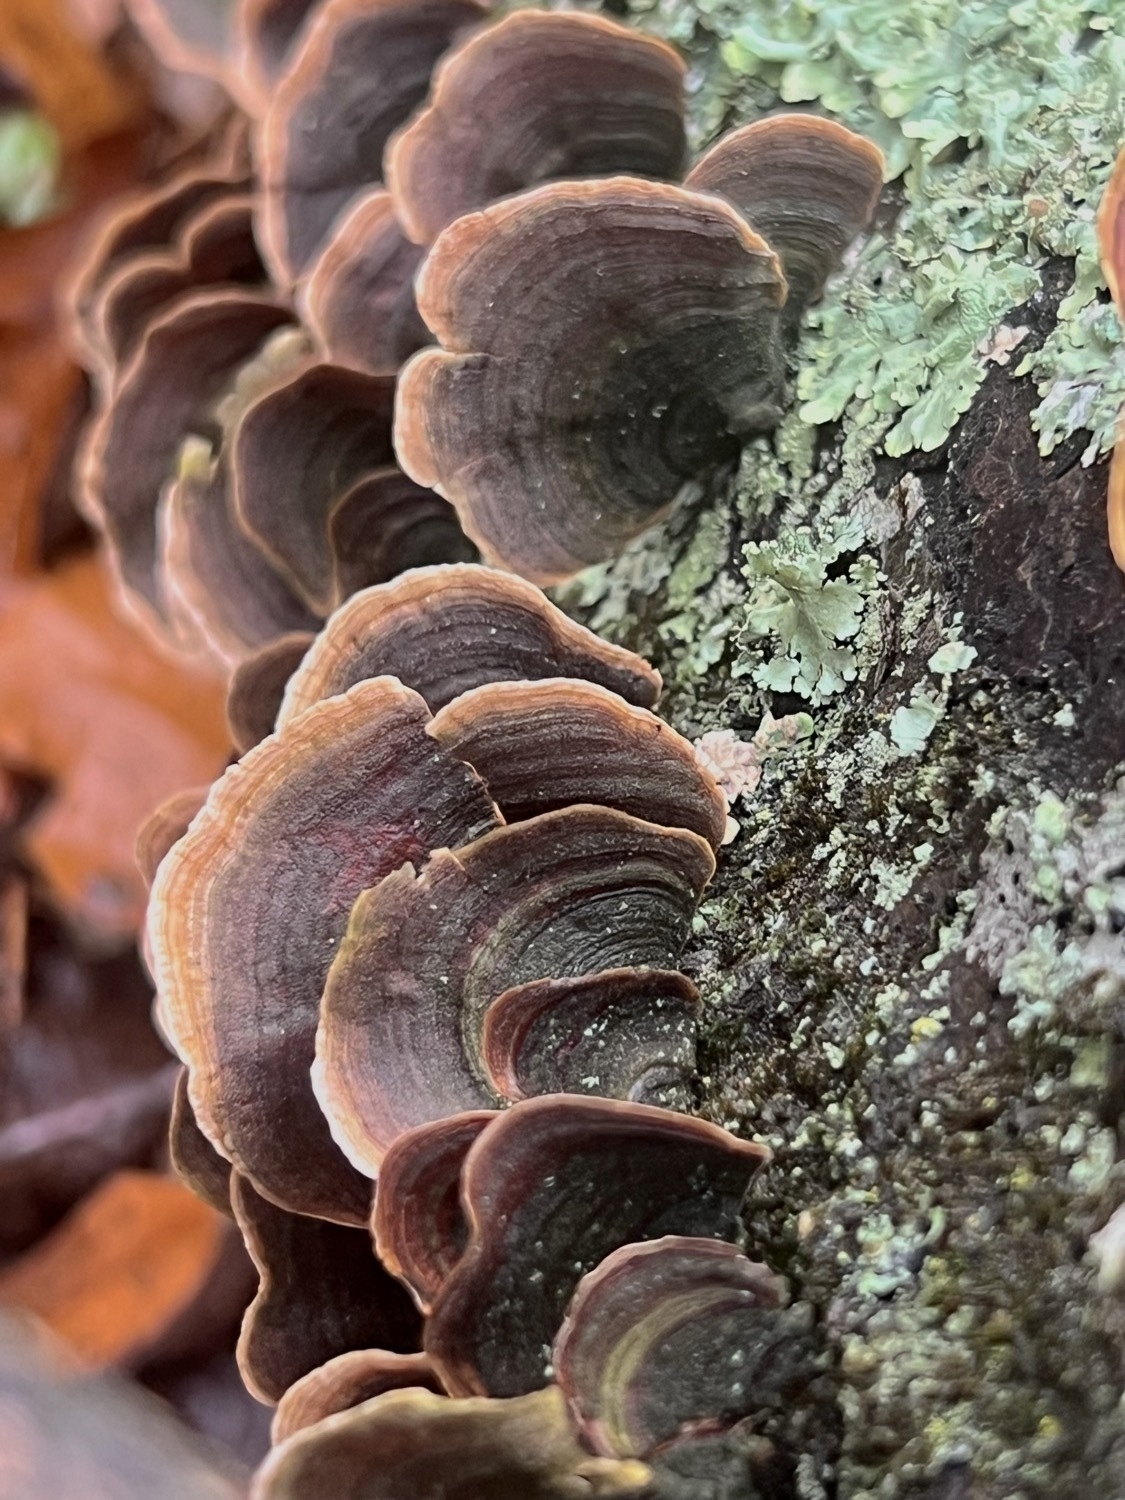 Fungi, dark brown at the center attachment to a tree. Rings outward gradually become lighter with the outer edges a light orange and white. They are in the shape of a semi-circle, somewhat resembling sea shells